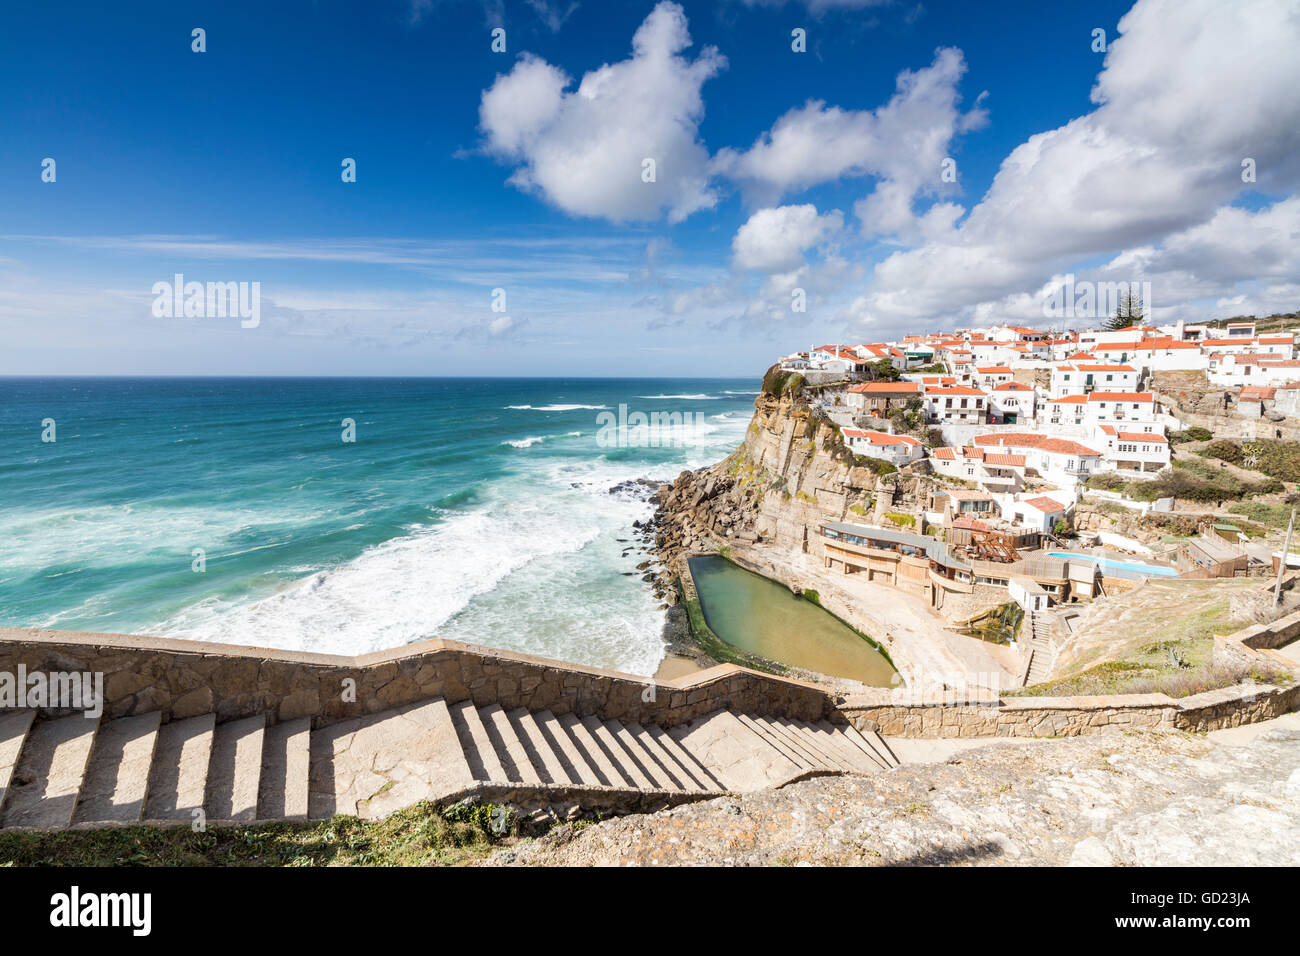 Top view of the perched village of Azenhas do Mar surrounded by the crashing waves of the Atlantic Ocean, Sintra, Portugal Stock Photo